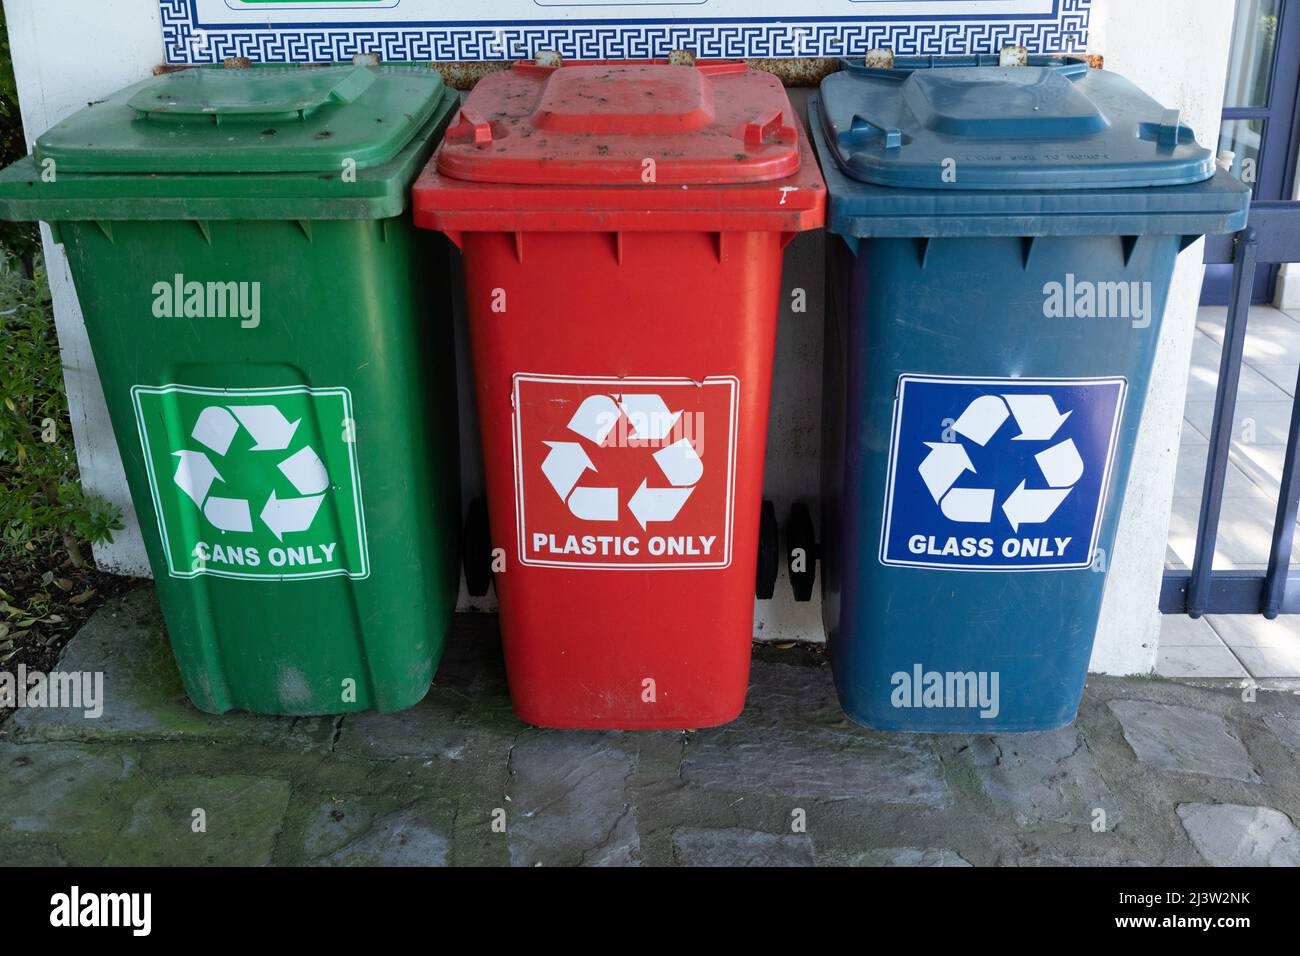 Three different coloured plastic bins for recycling. Green for cans red for plastic and a blue bin for glass. Stock Photo